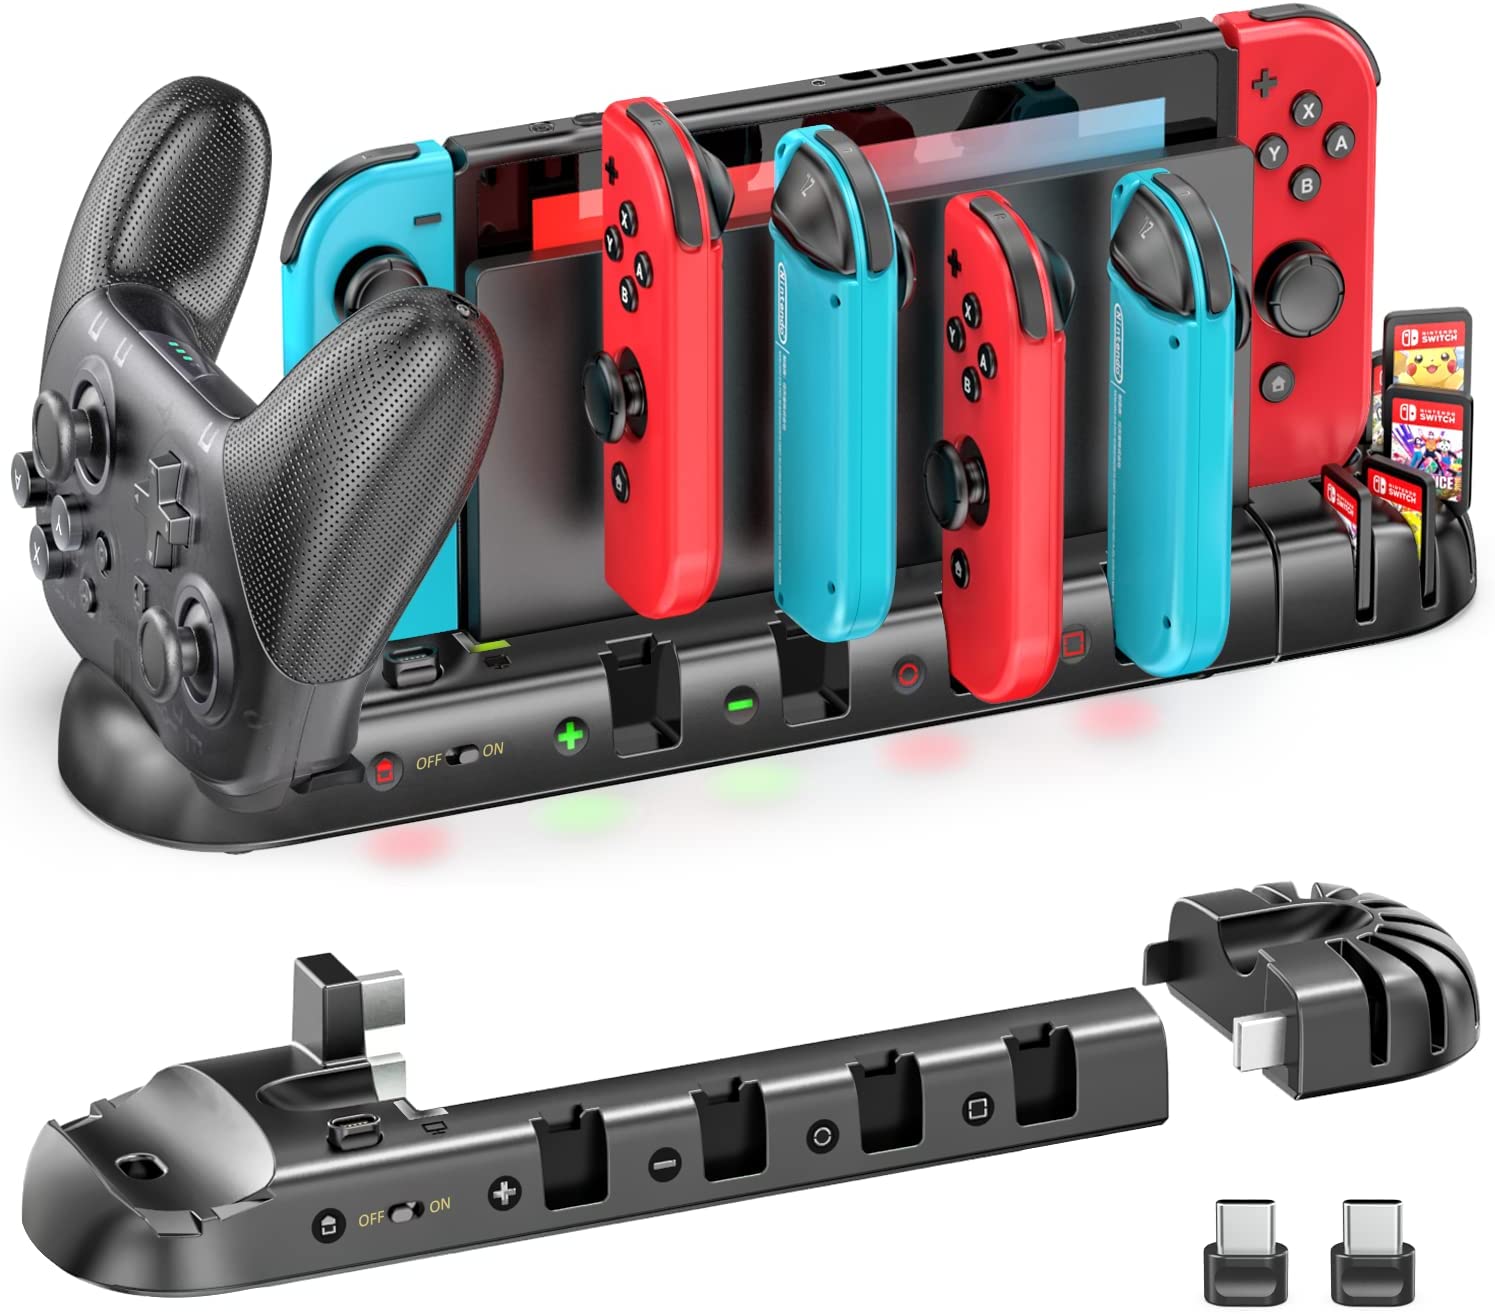 Switch Controller Charger for 6 Joy-Cons and Pro Controller – OIVOGAMES